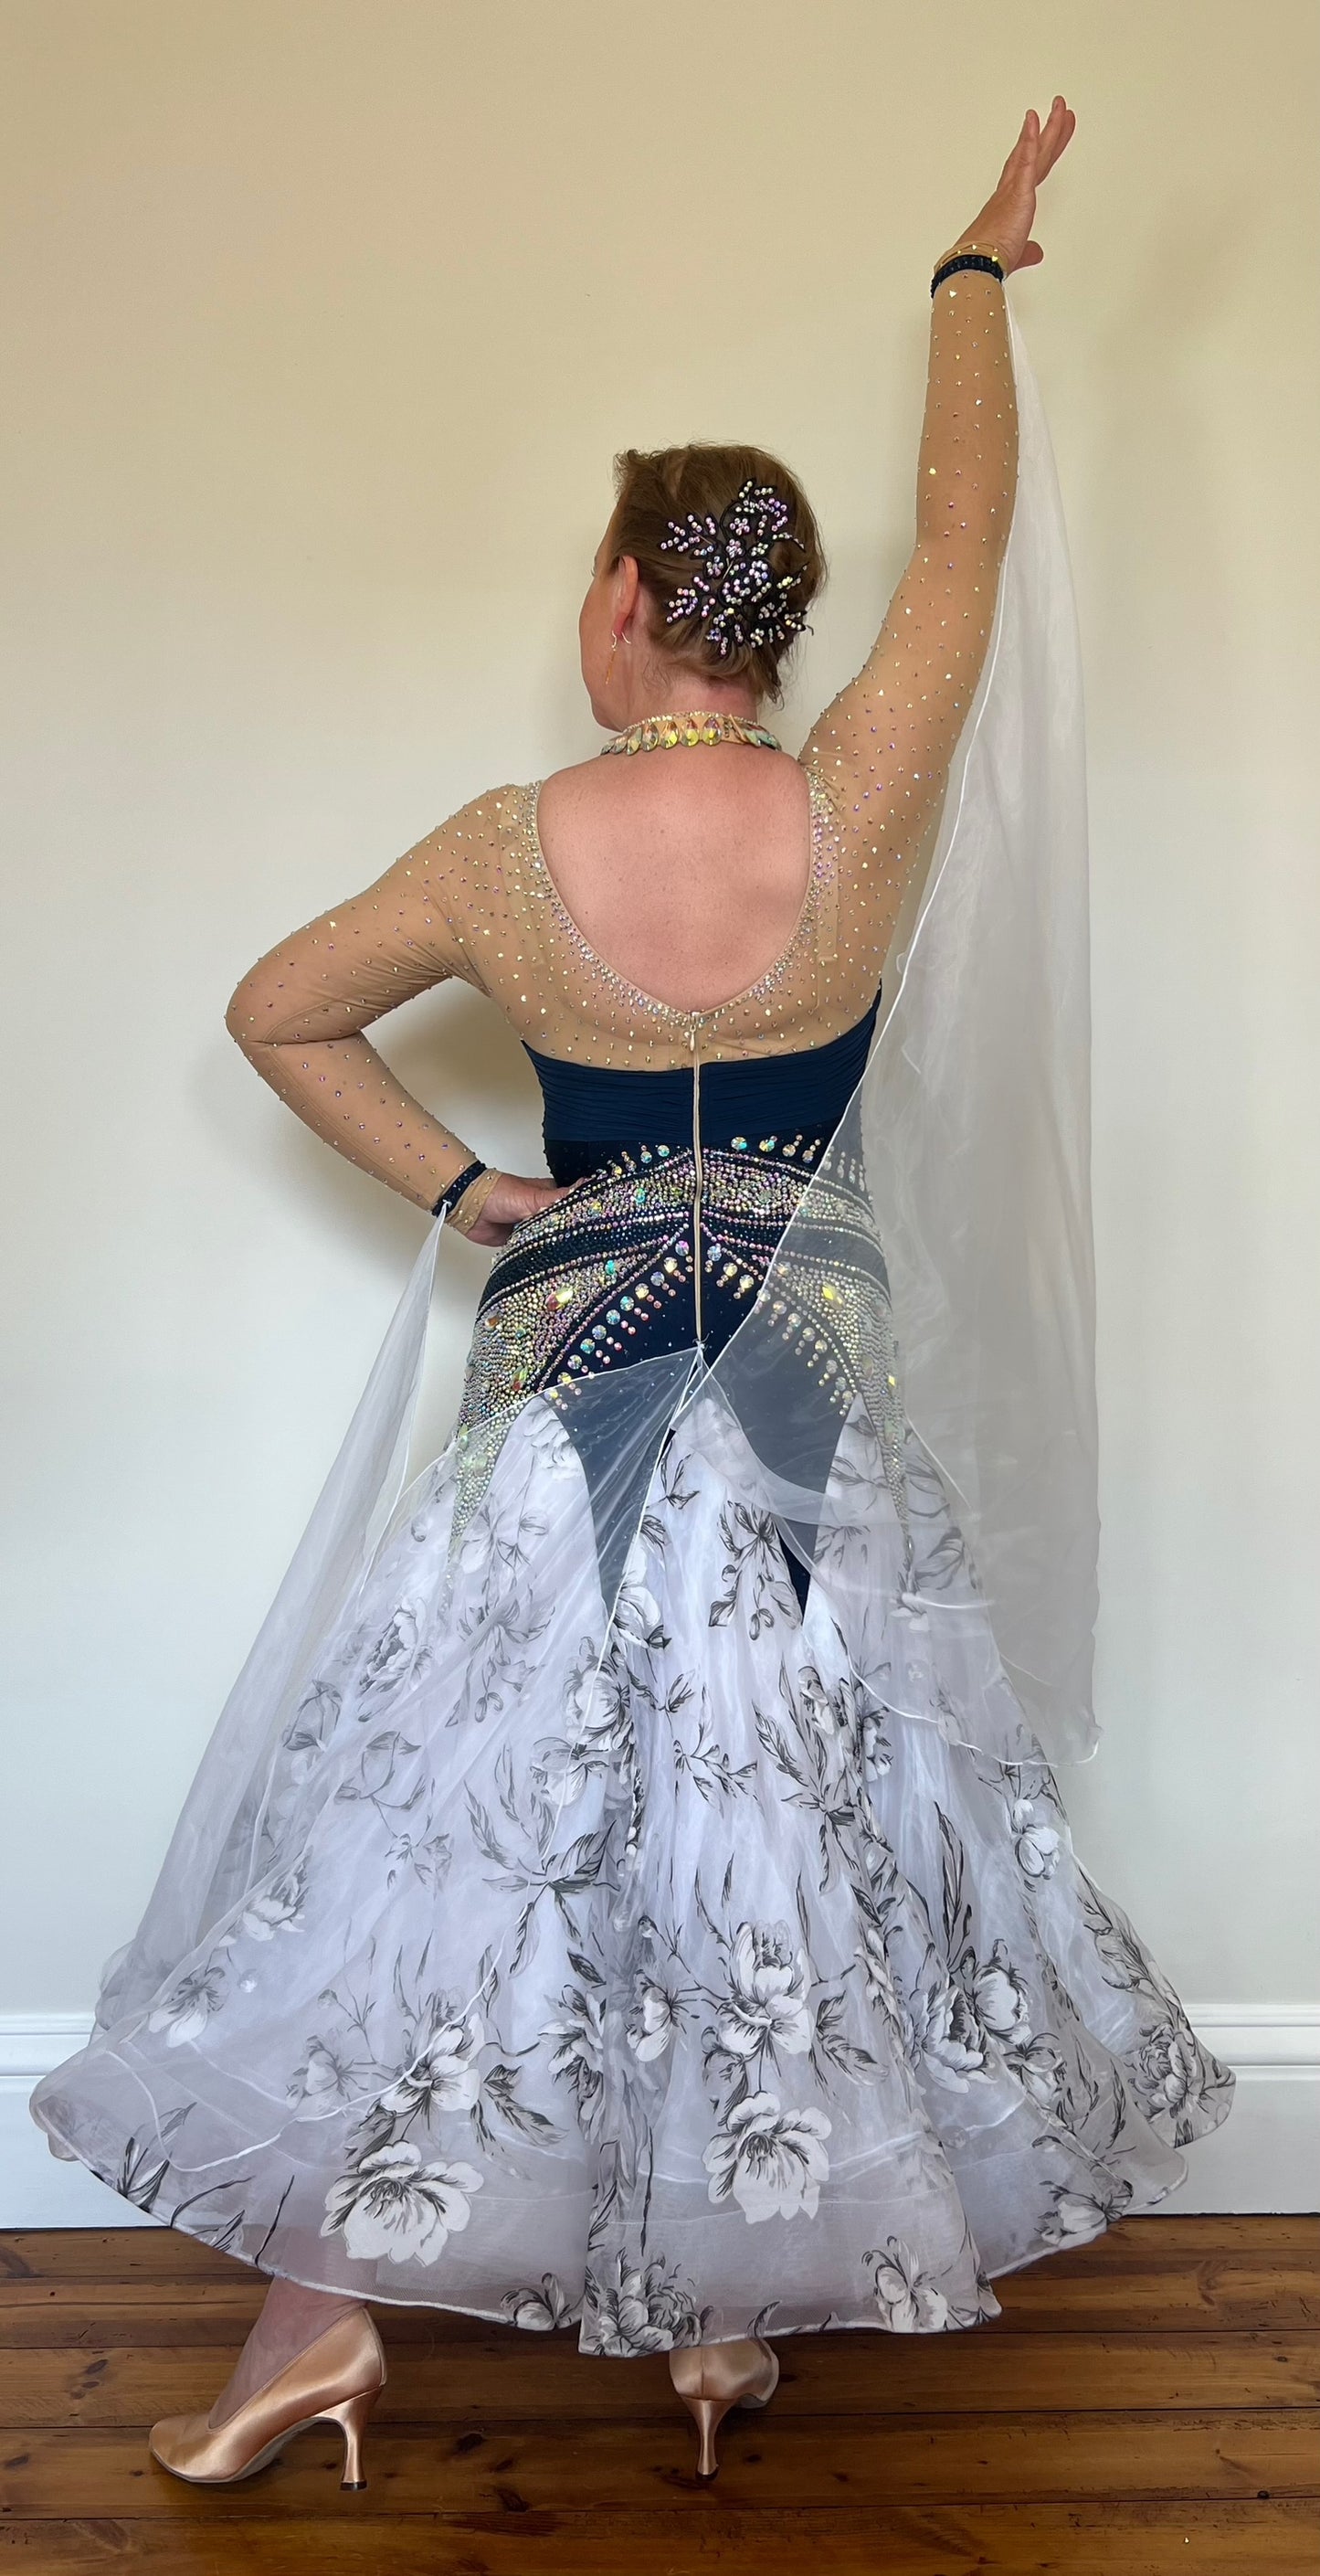 149 Navy & Flesh Bodice with beautiful Floral Organza Skirt Ballroom Dress. Heavily stoned in AB with floats at the wrist & back.